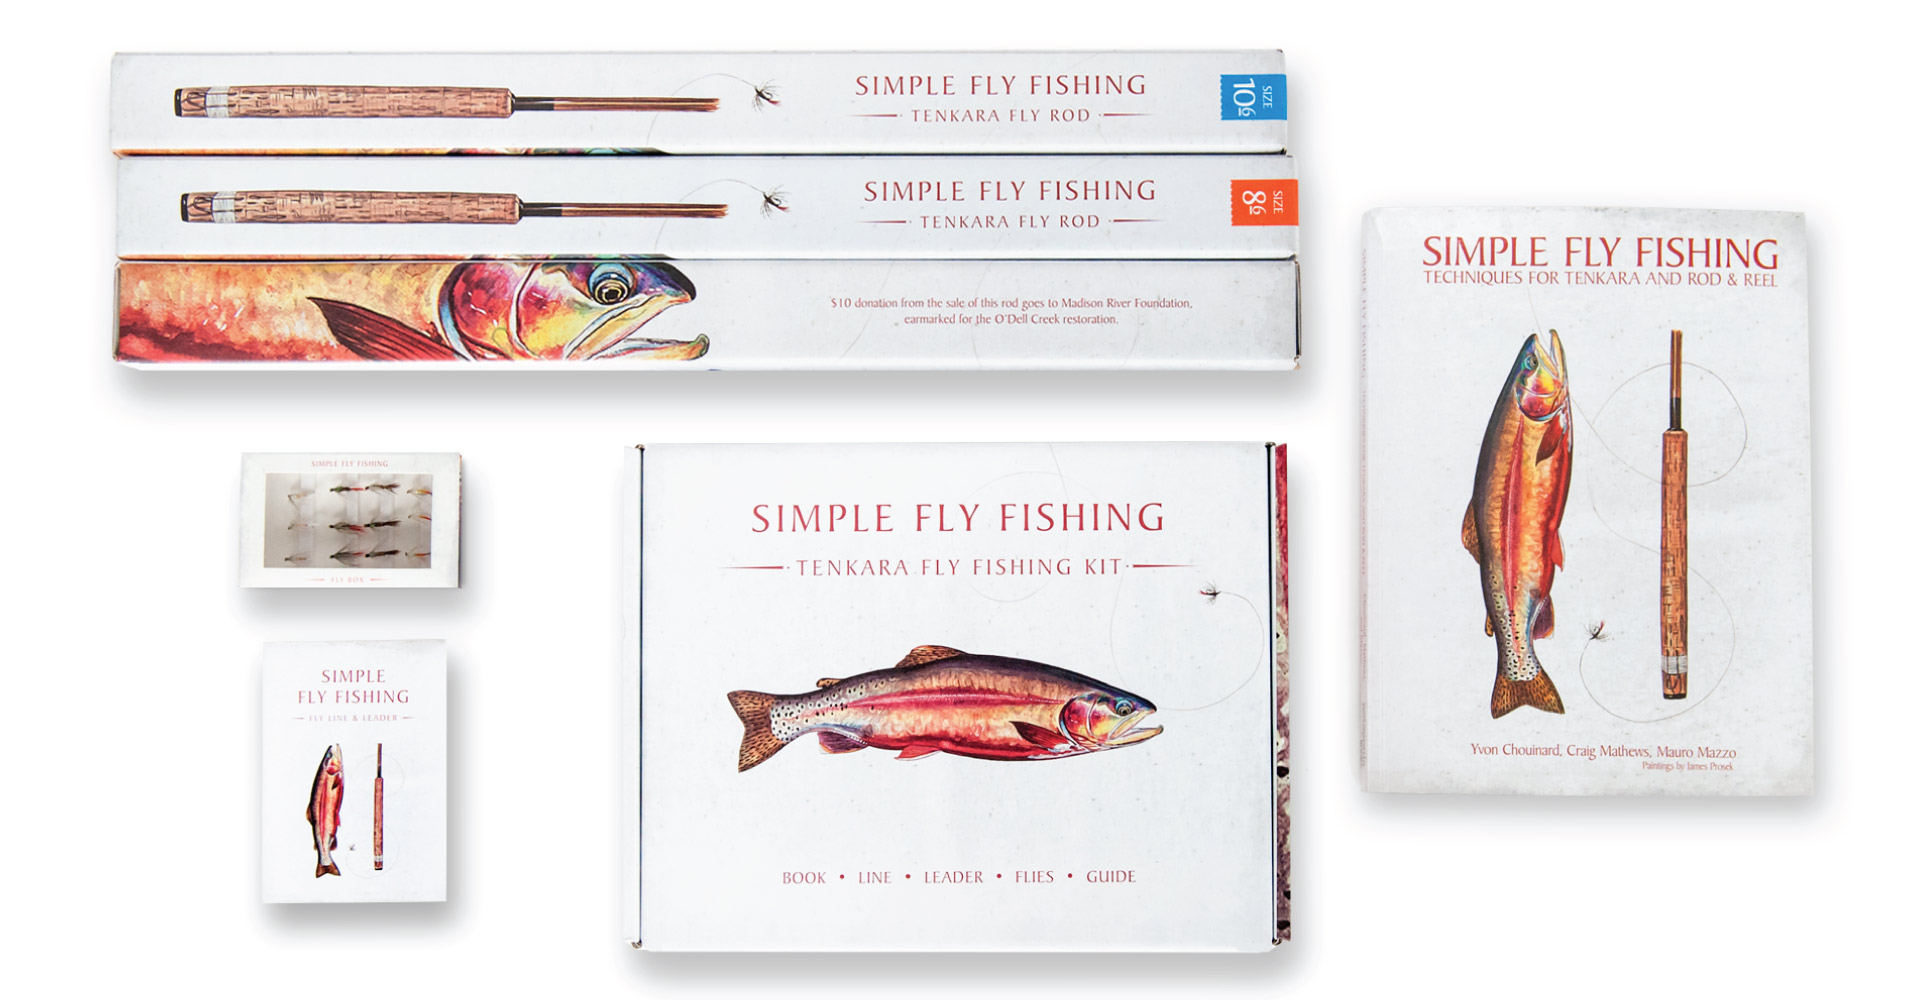 Explore Patagonia's Simple Fly Fishing Product Packaging